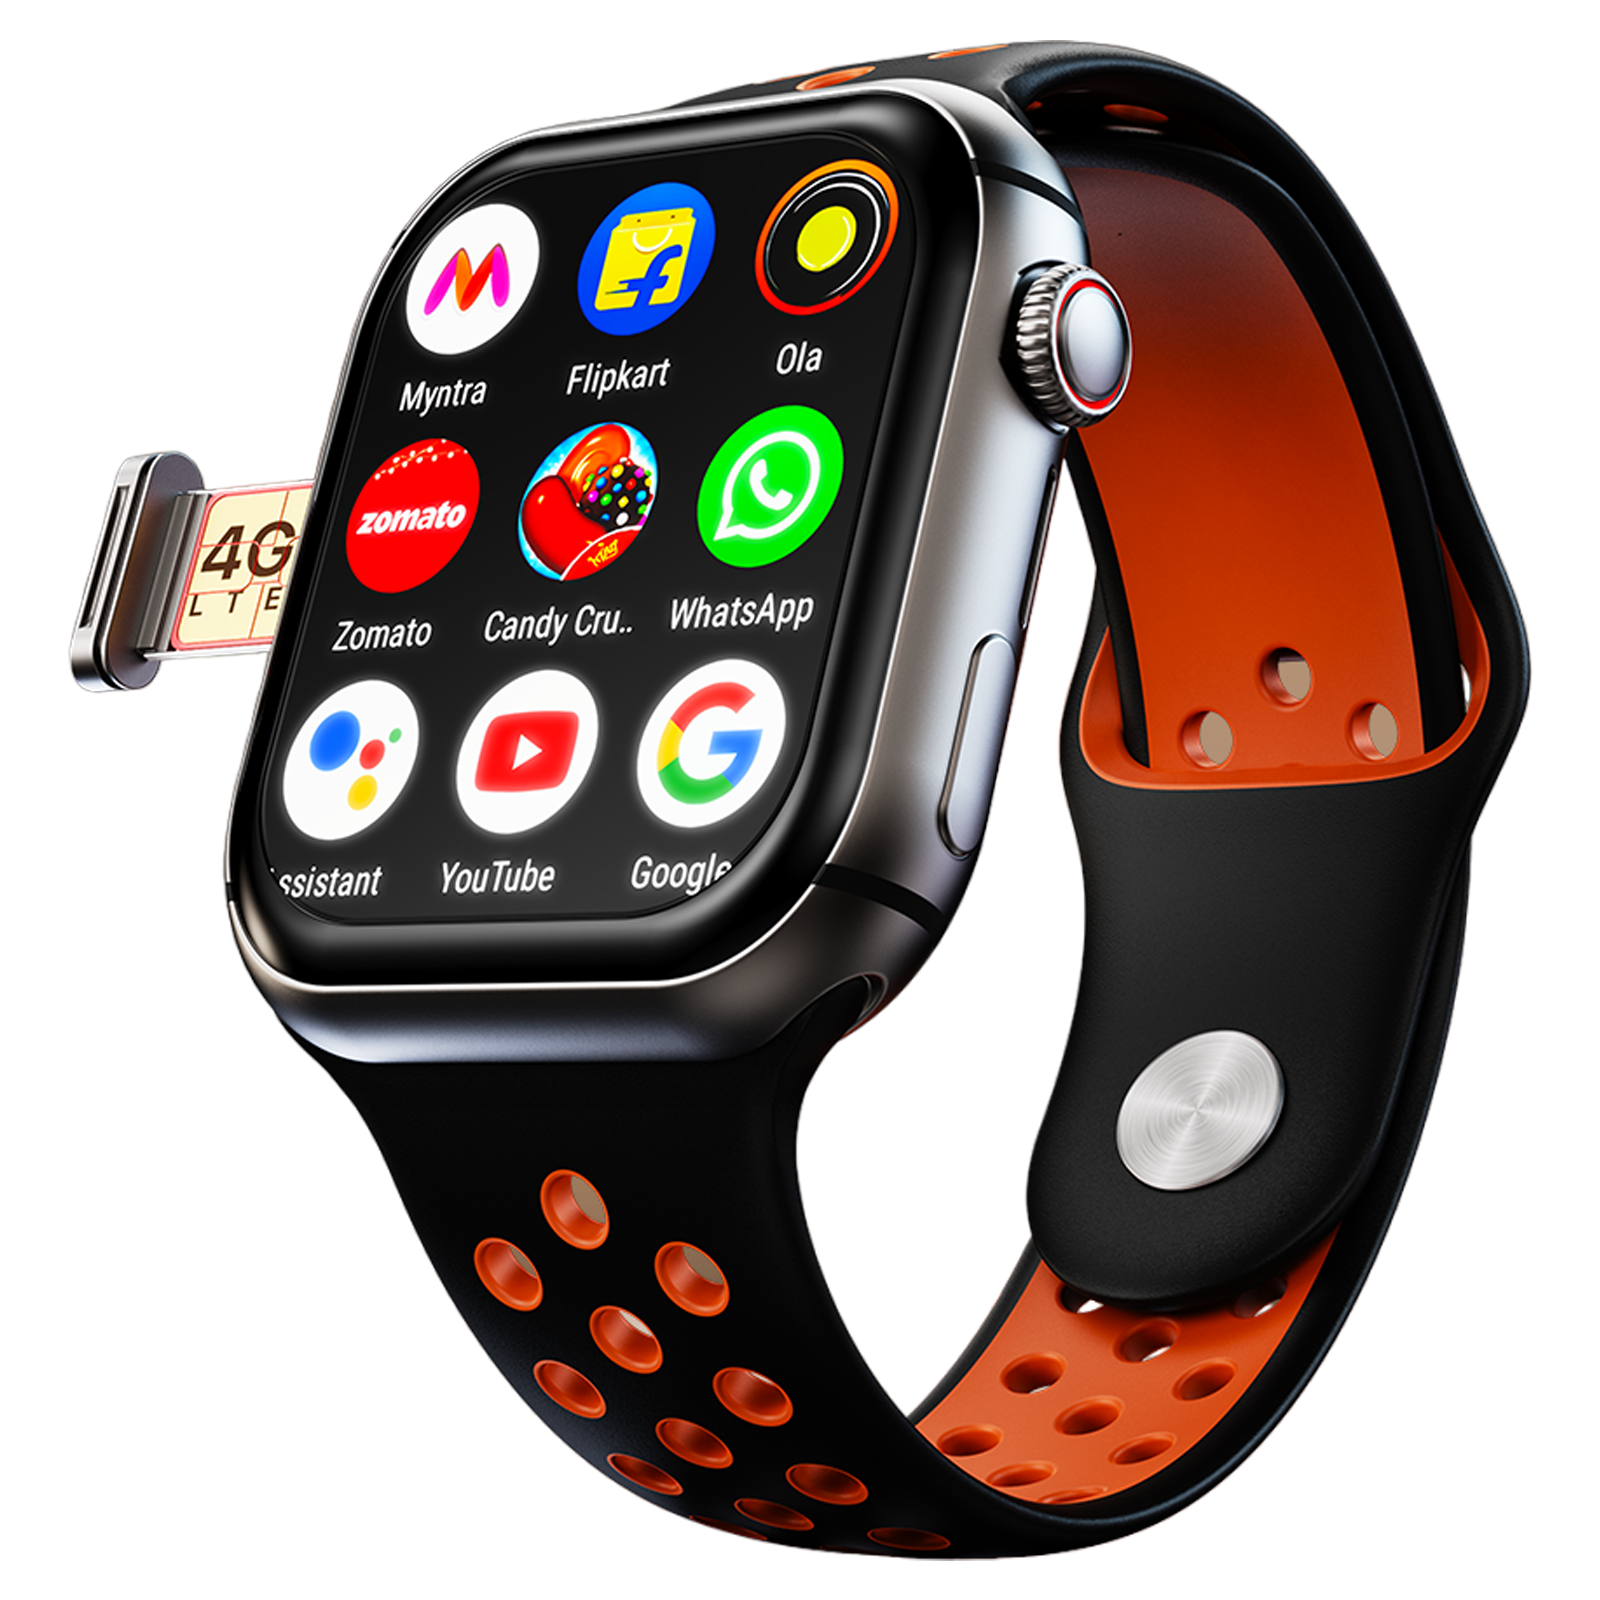 lemfo LEMX 4G LTE - Android 7.1 8MP GPS WiFi Smartwatch Price in India -  Buy lemfo LEMX 4G LTE - Android 7.1 8MP GPS WiFi Smartwatch online at  Flipkart.com